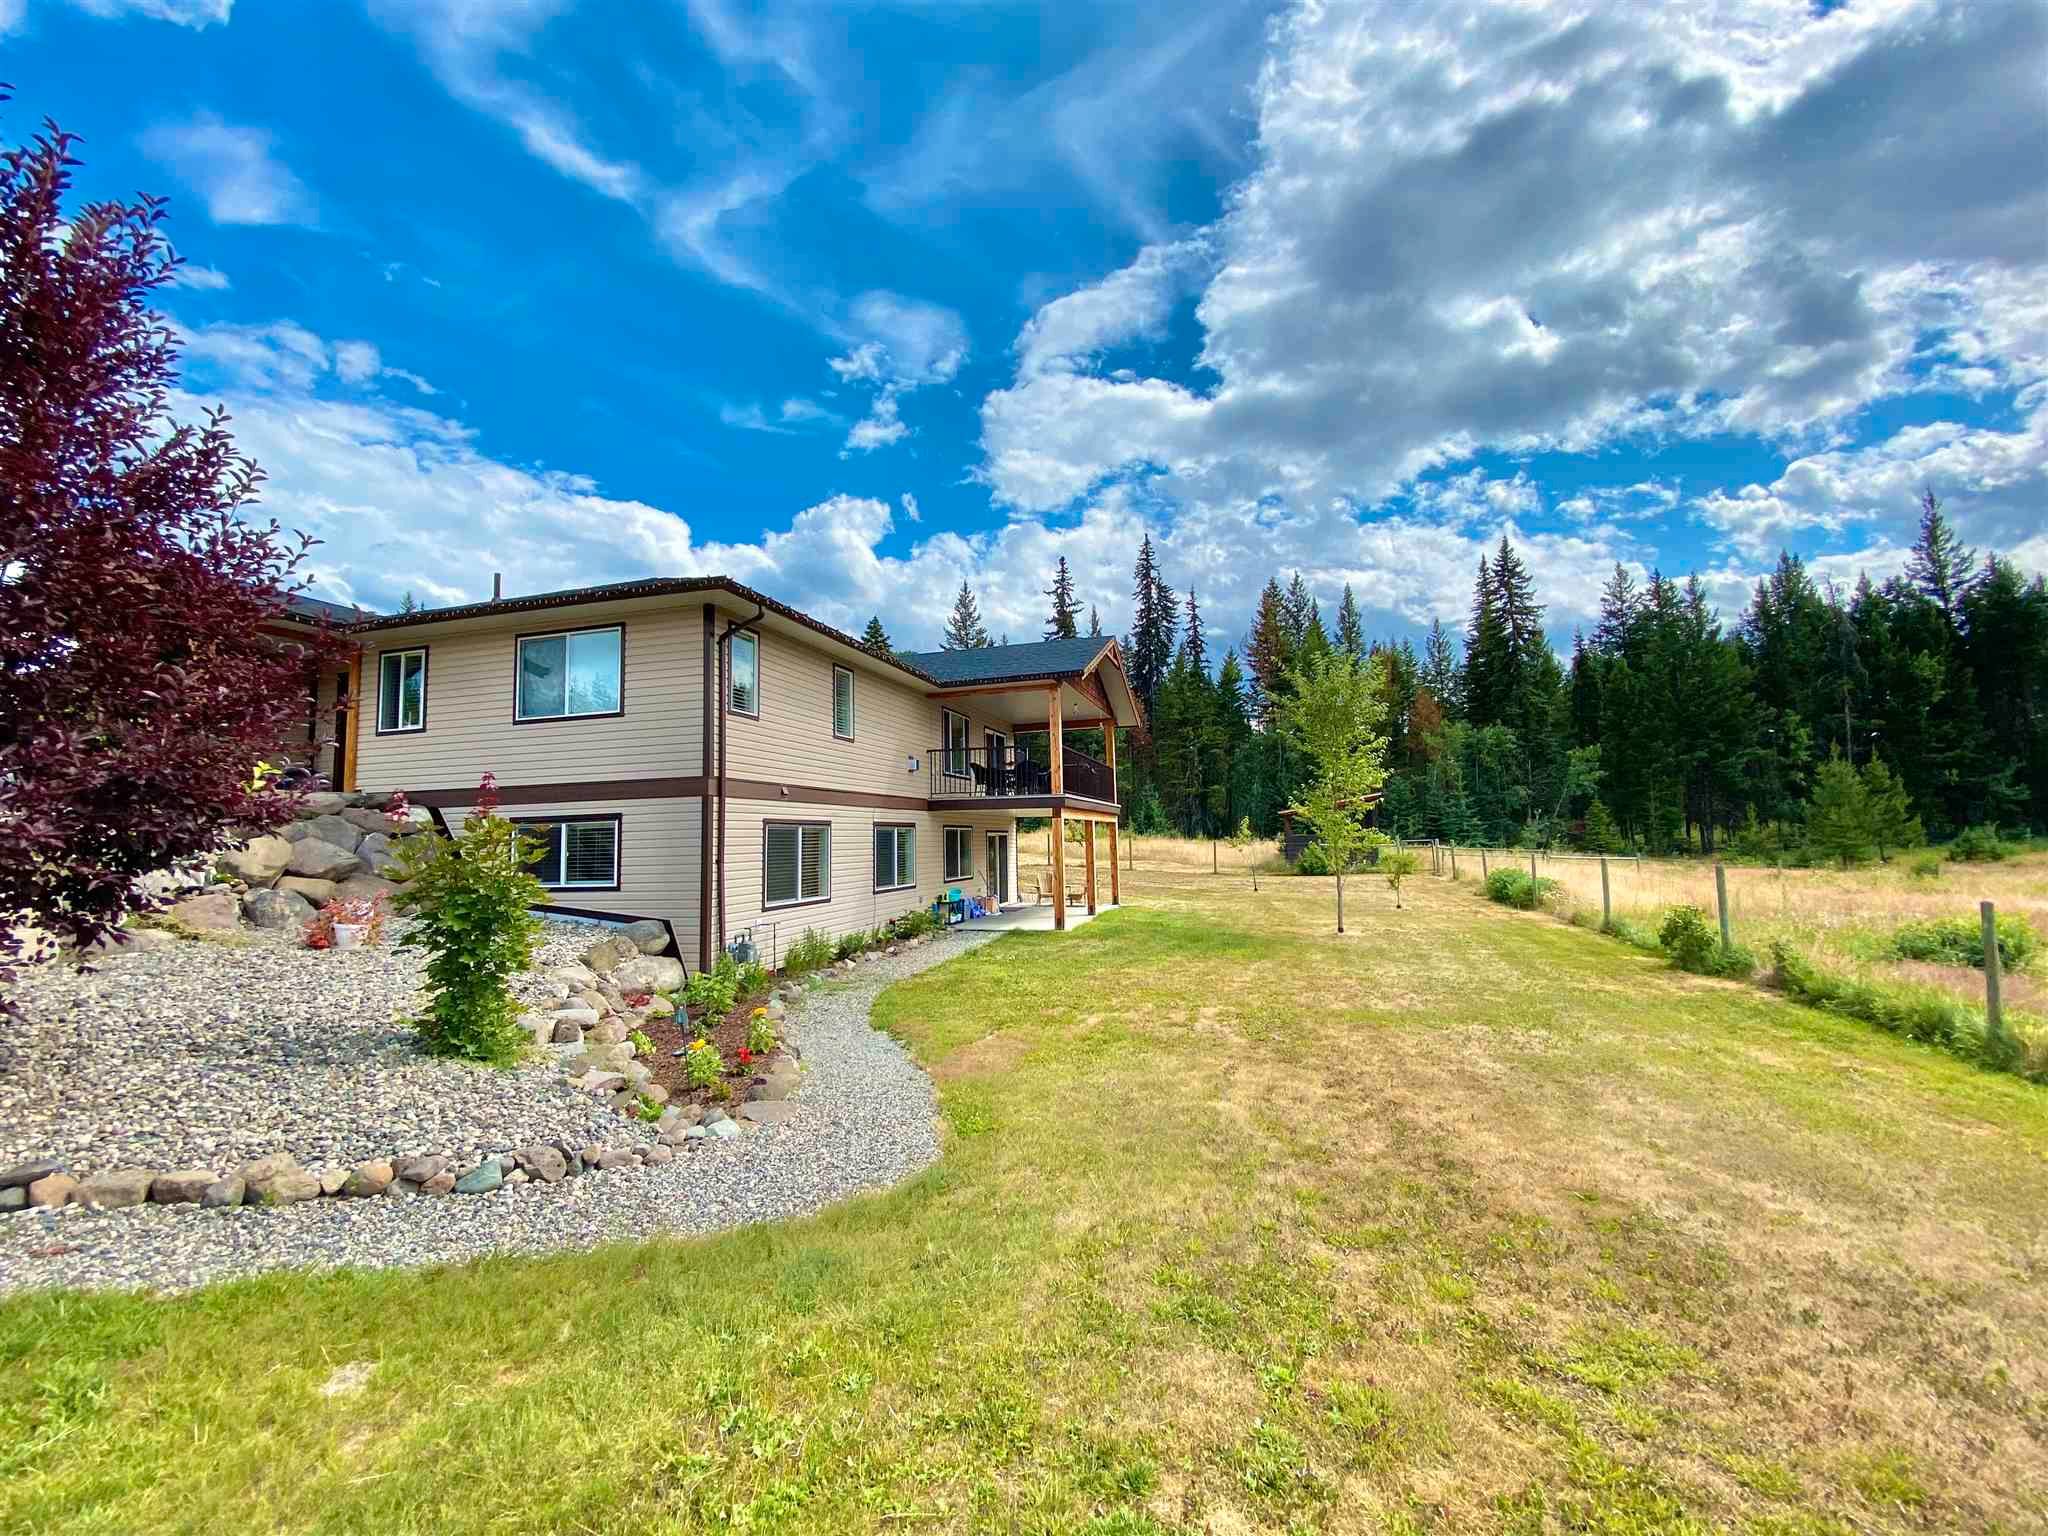 I have sold a property at 3136 PIGEON RD in Williams Lake
